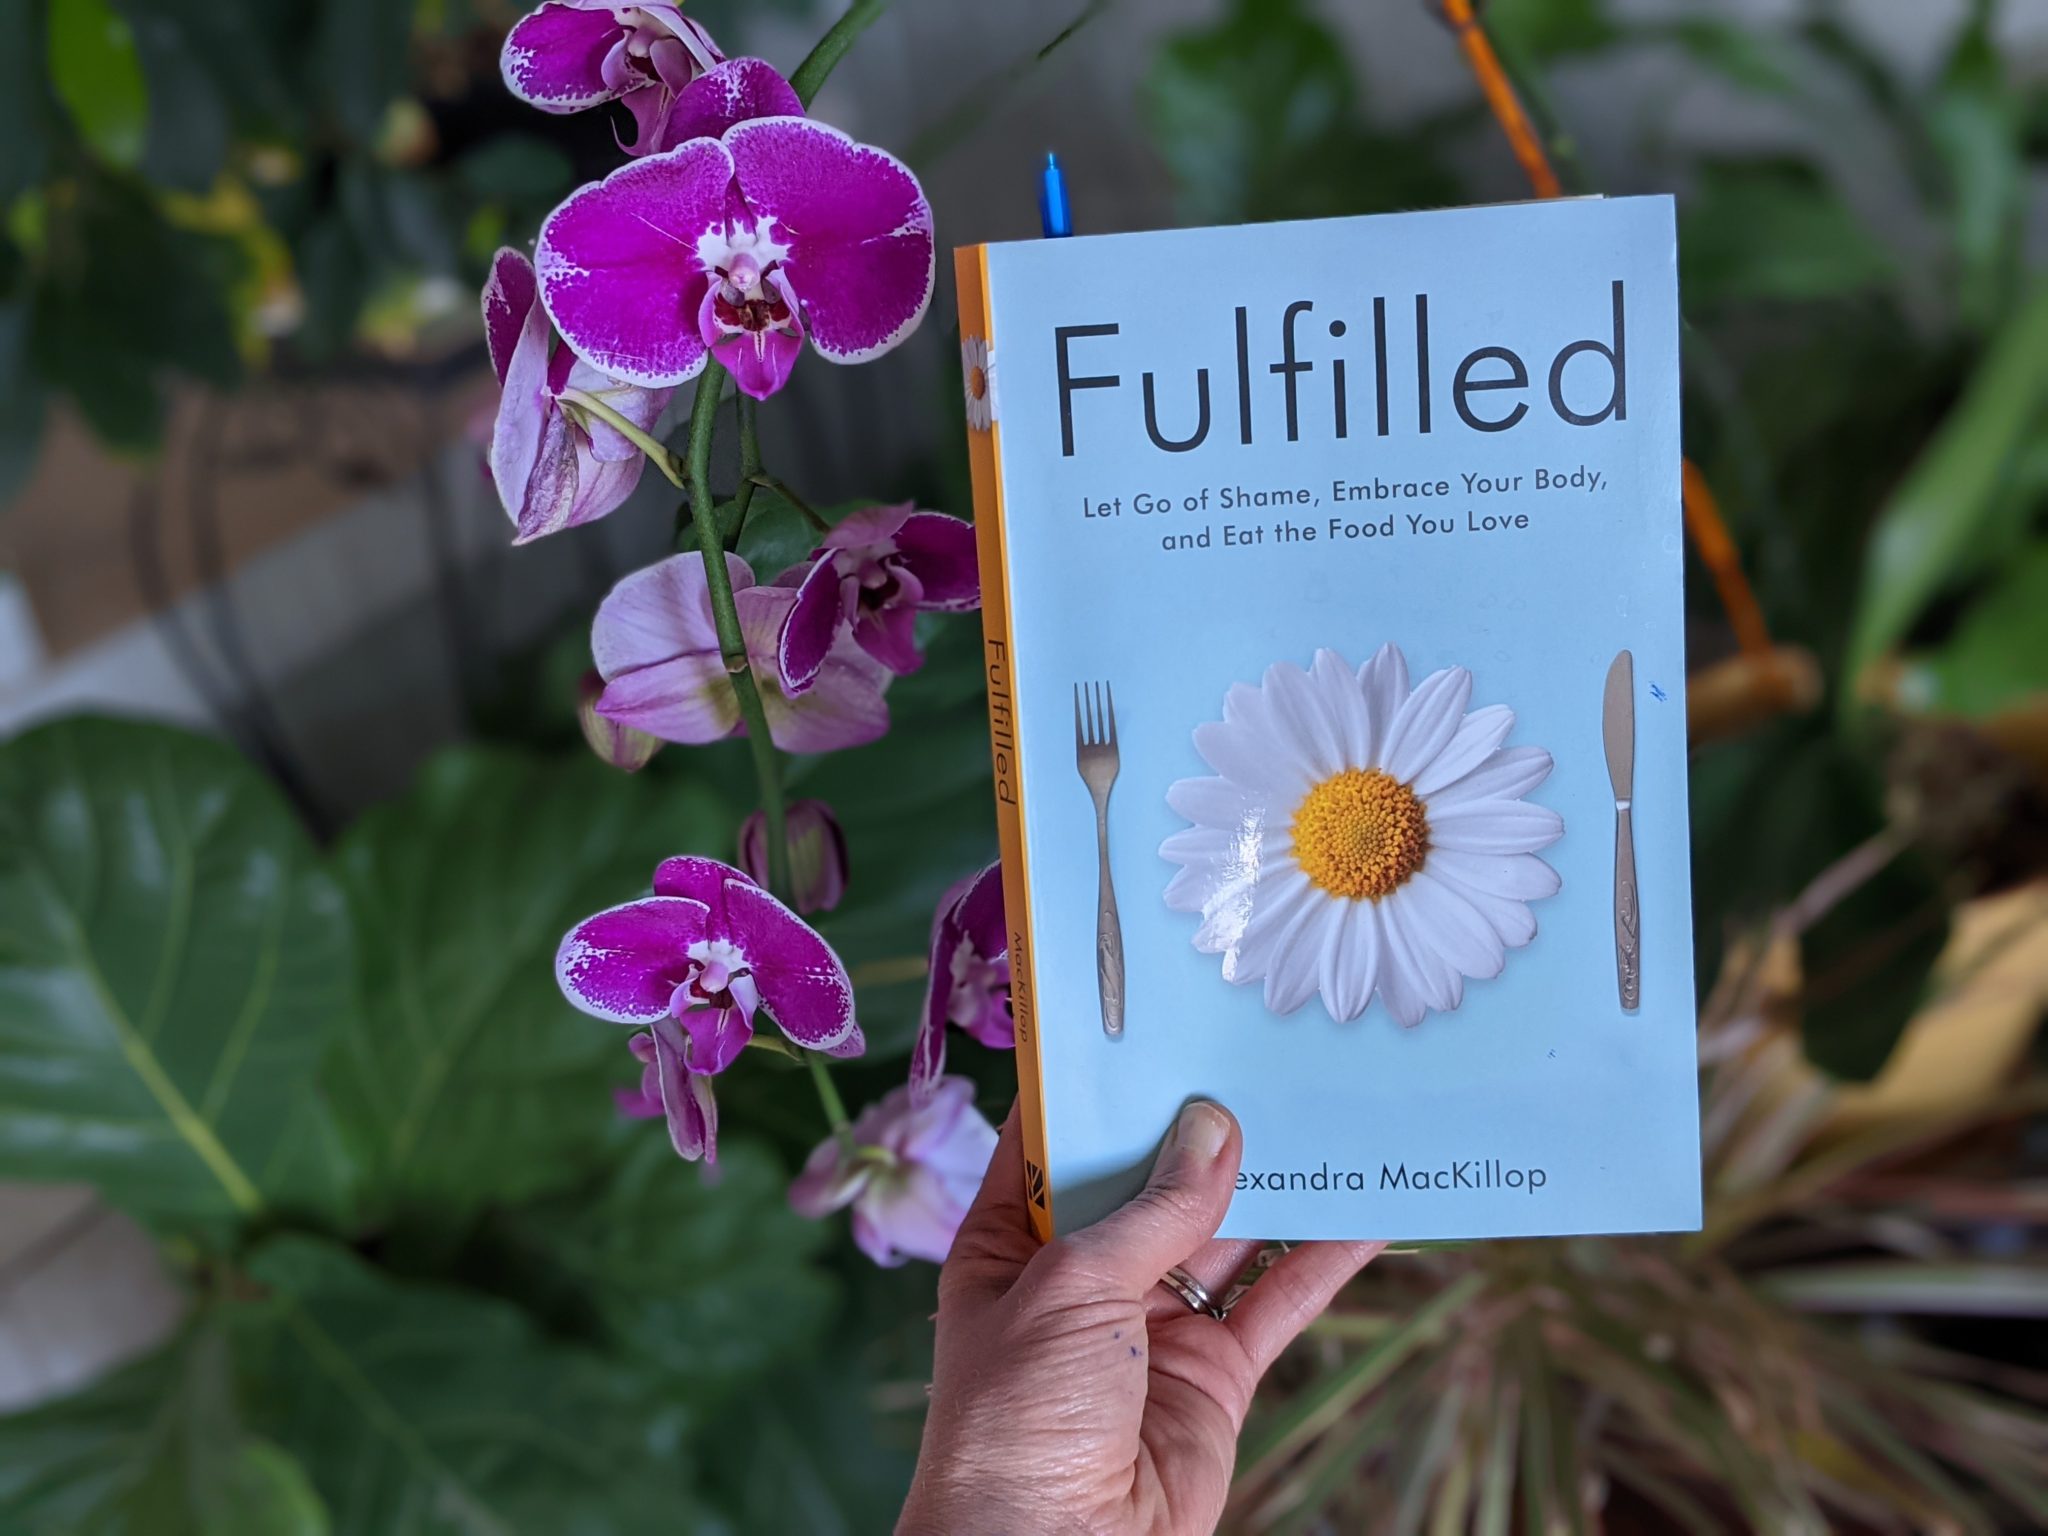 Fulfilled: Let Go of Shame, Embrace Your Body, and Eat the Food you Love - The newest book on intuitive eating from a faith-based perspective is Fulfilled by Alexandra MacKillop